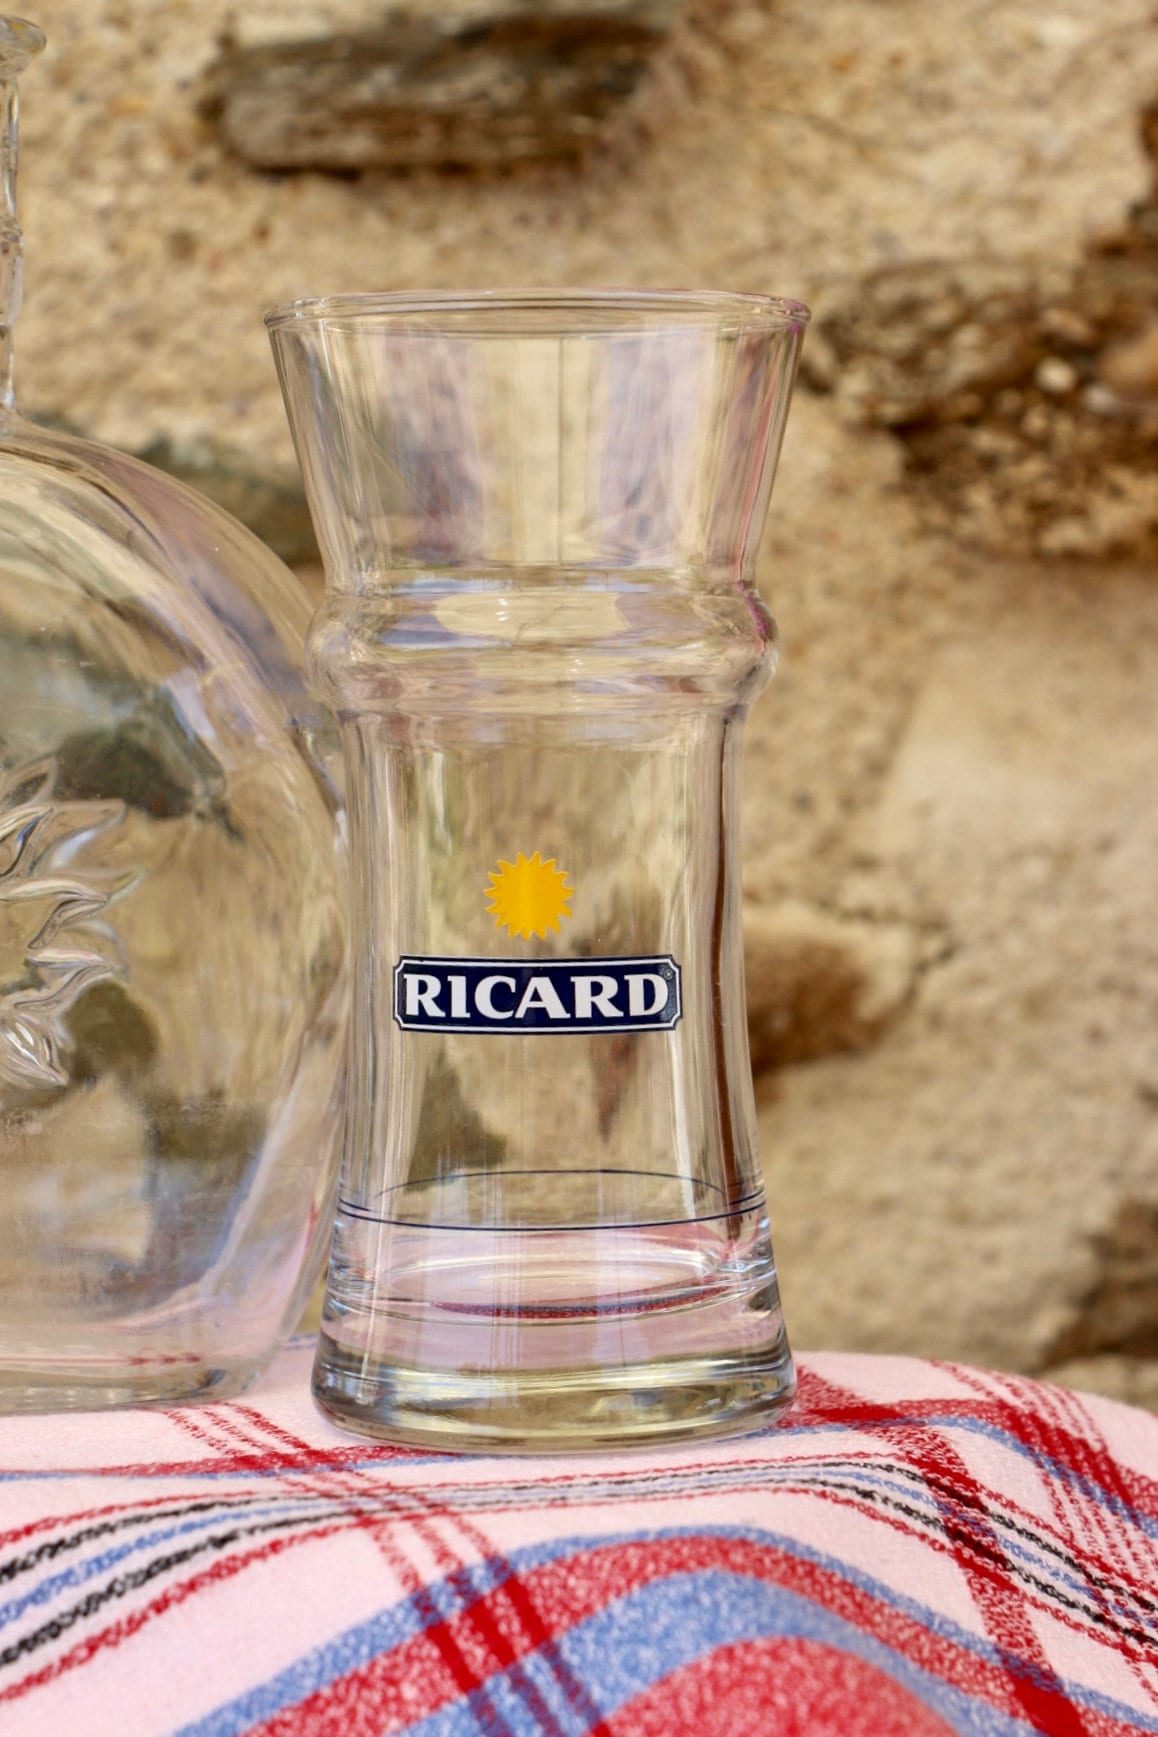 Vintage RICARD French Café Water Carafe